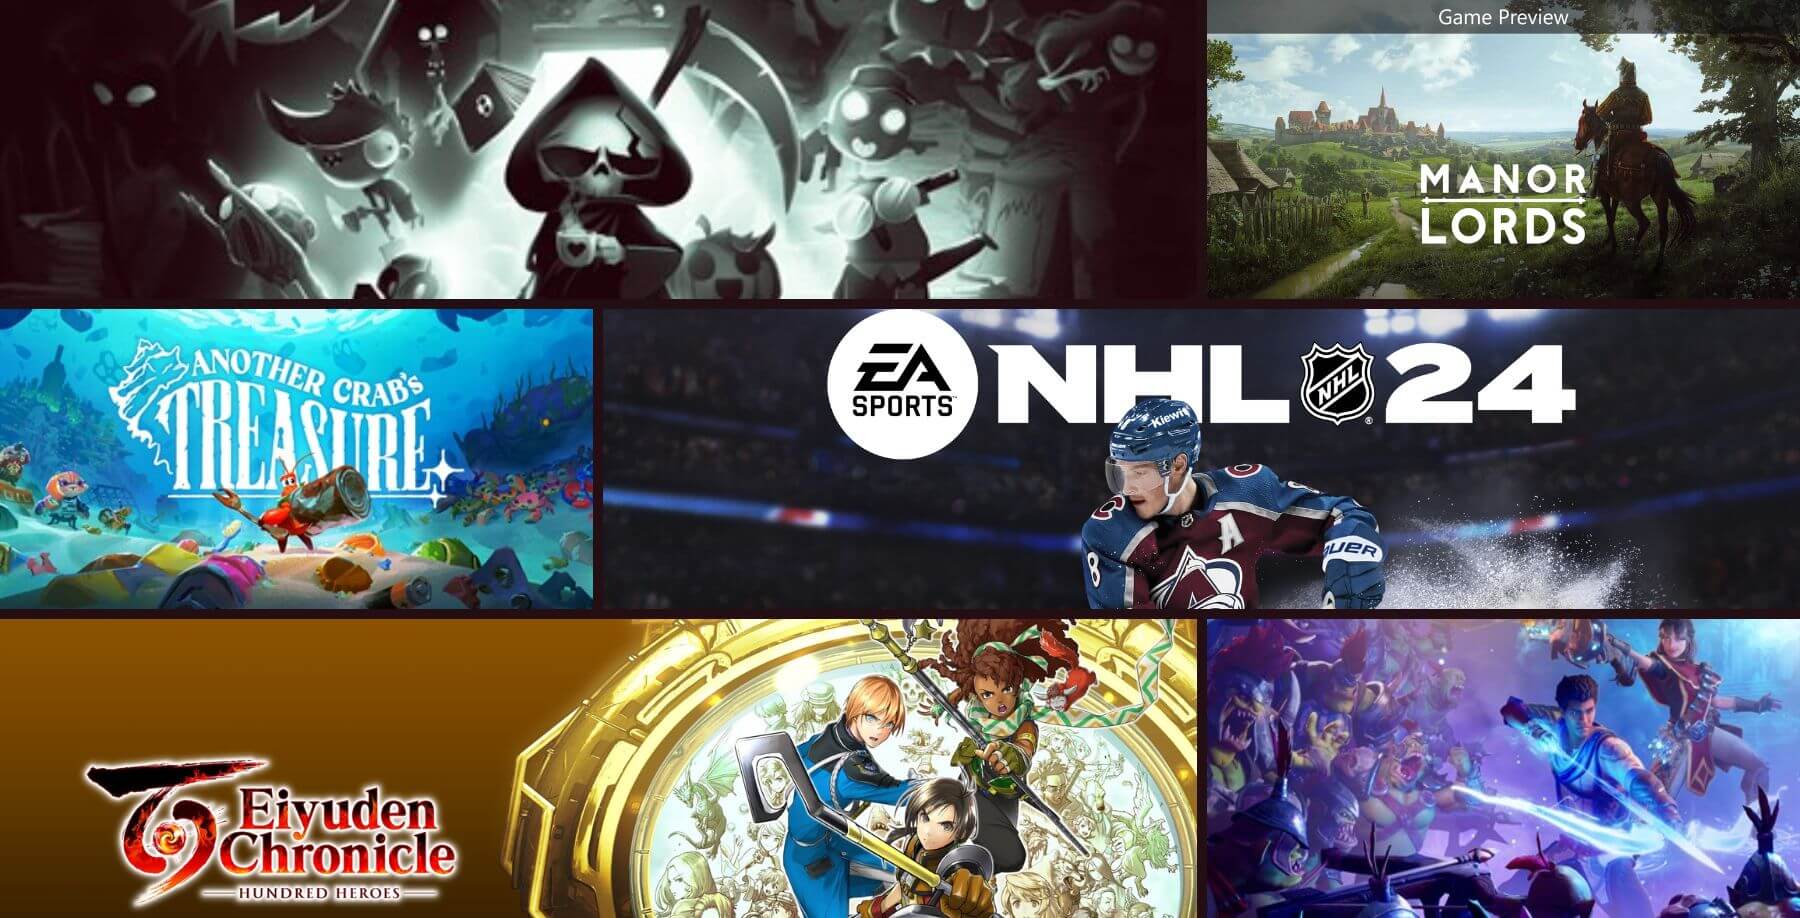 Capas dos jogos Have A Nice Death, Manor Lords, Another Crab’s Treasure, EA Sports NHL 24 - EA Play, Eiyuden Chronicle Hundred Heroes e Orcs Must Die 3